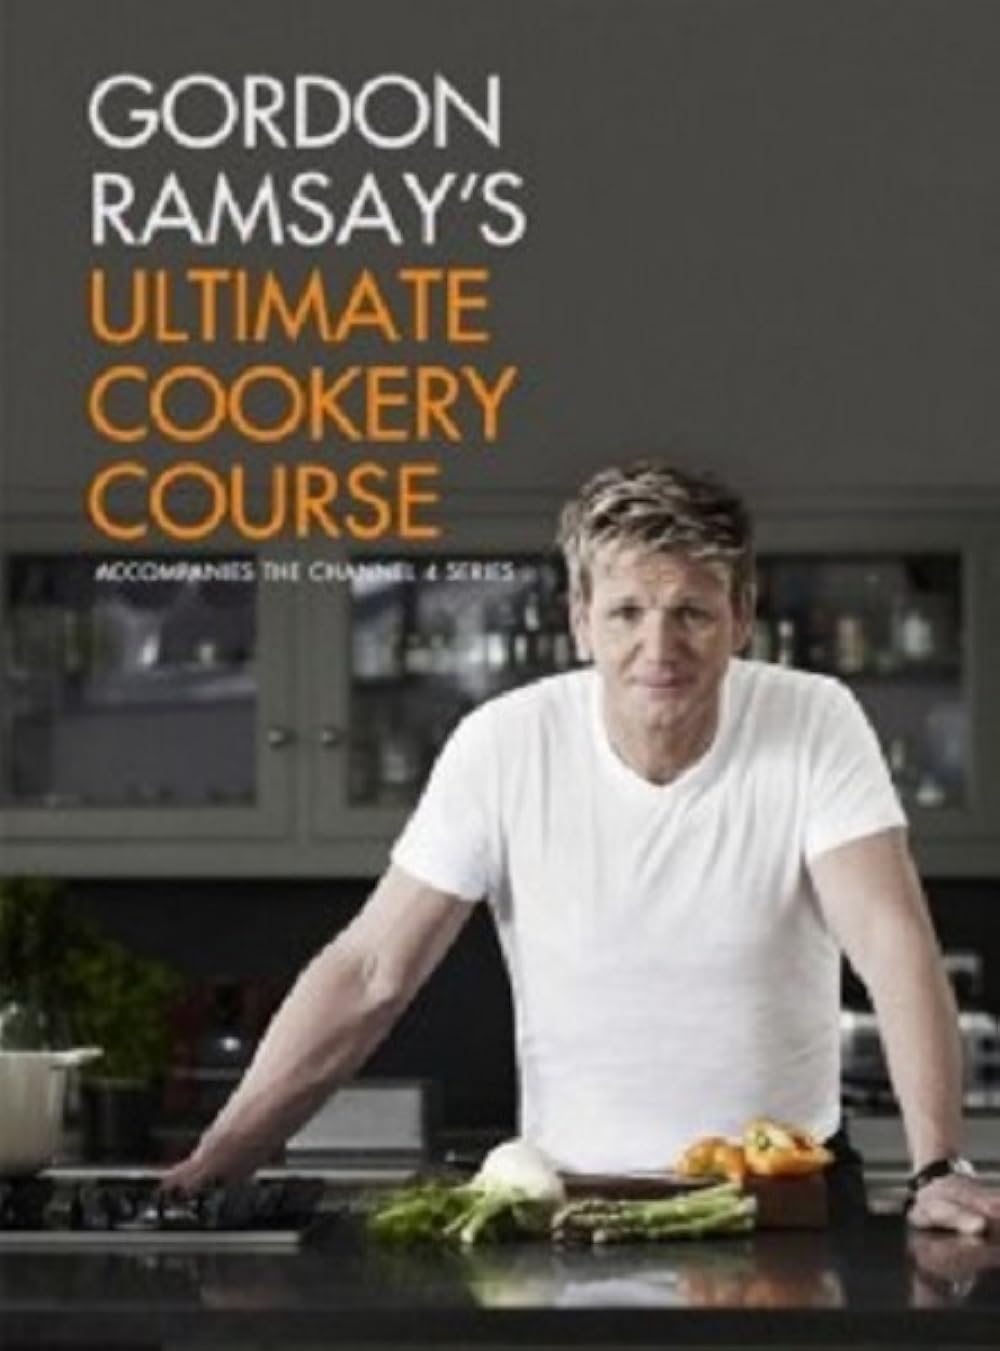 Gordon Ramsays Ultimate Cookery Course